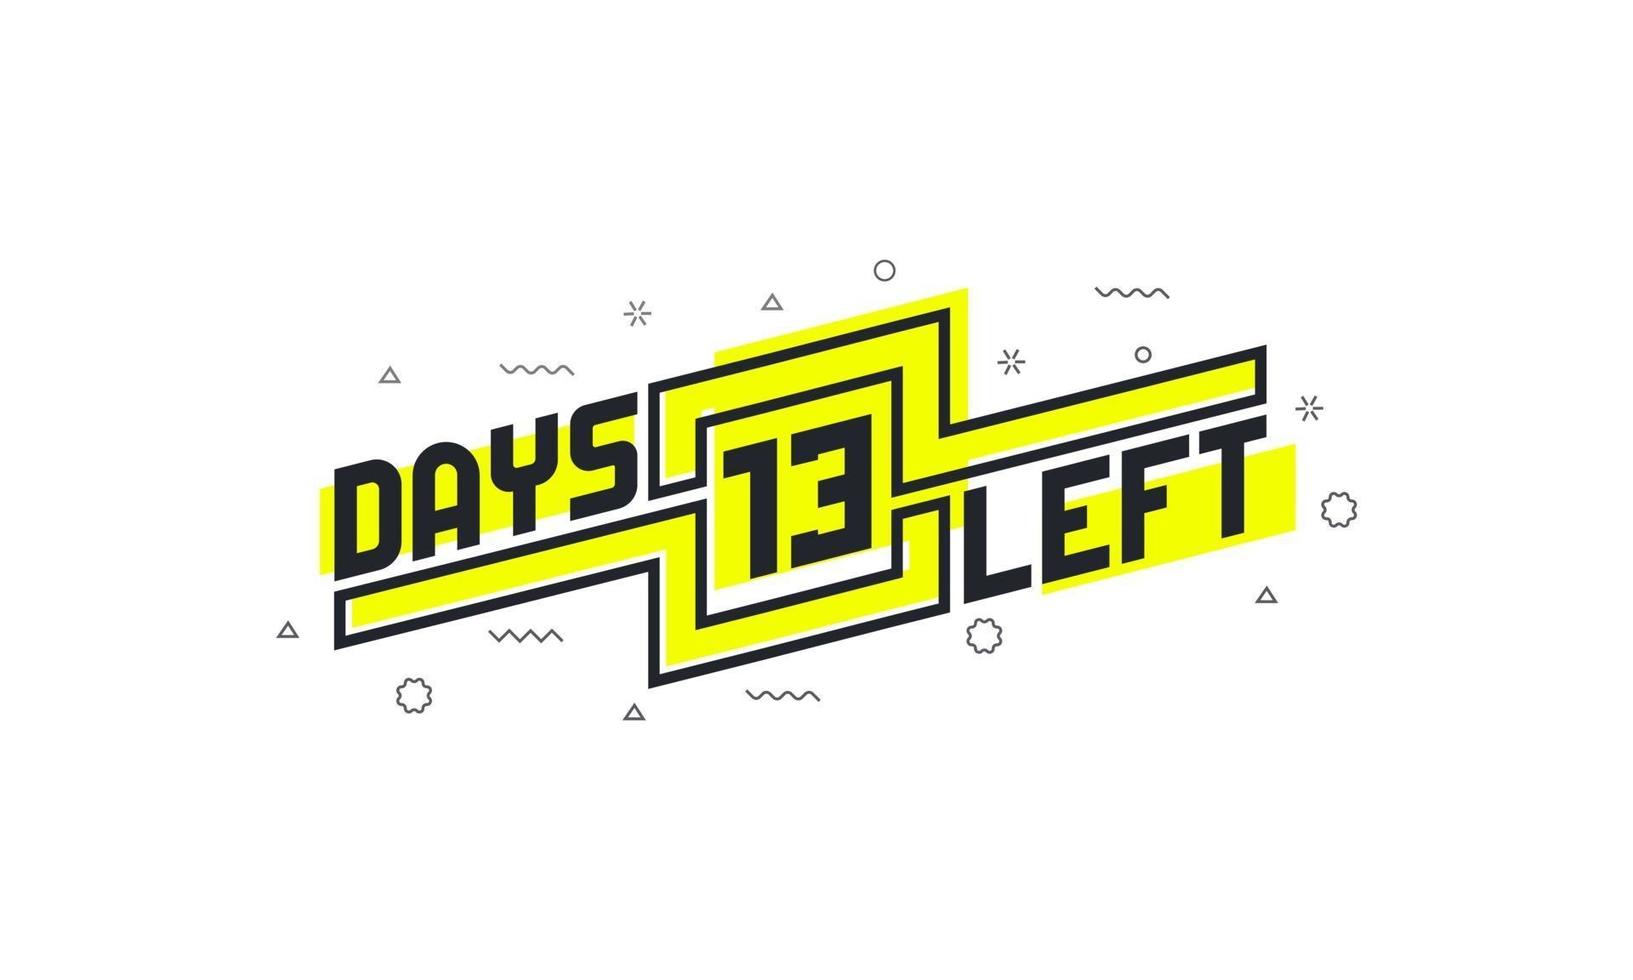 13 days left countdown sign for sale or promotion. vector